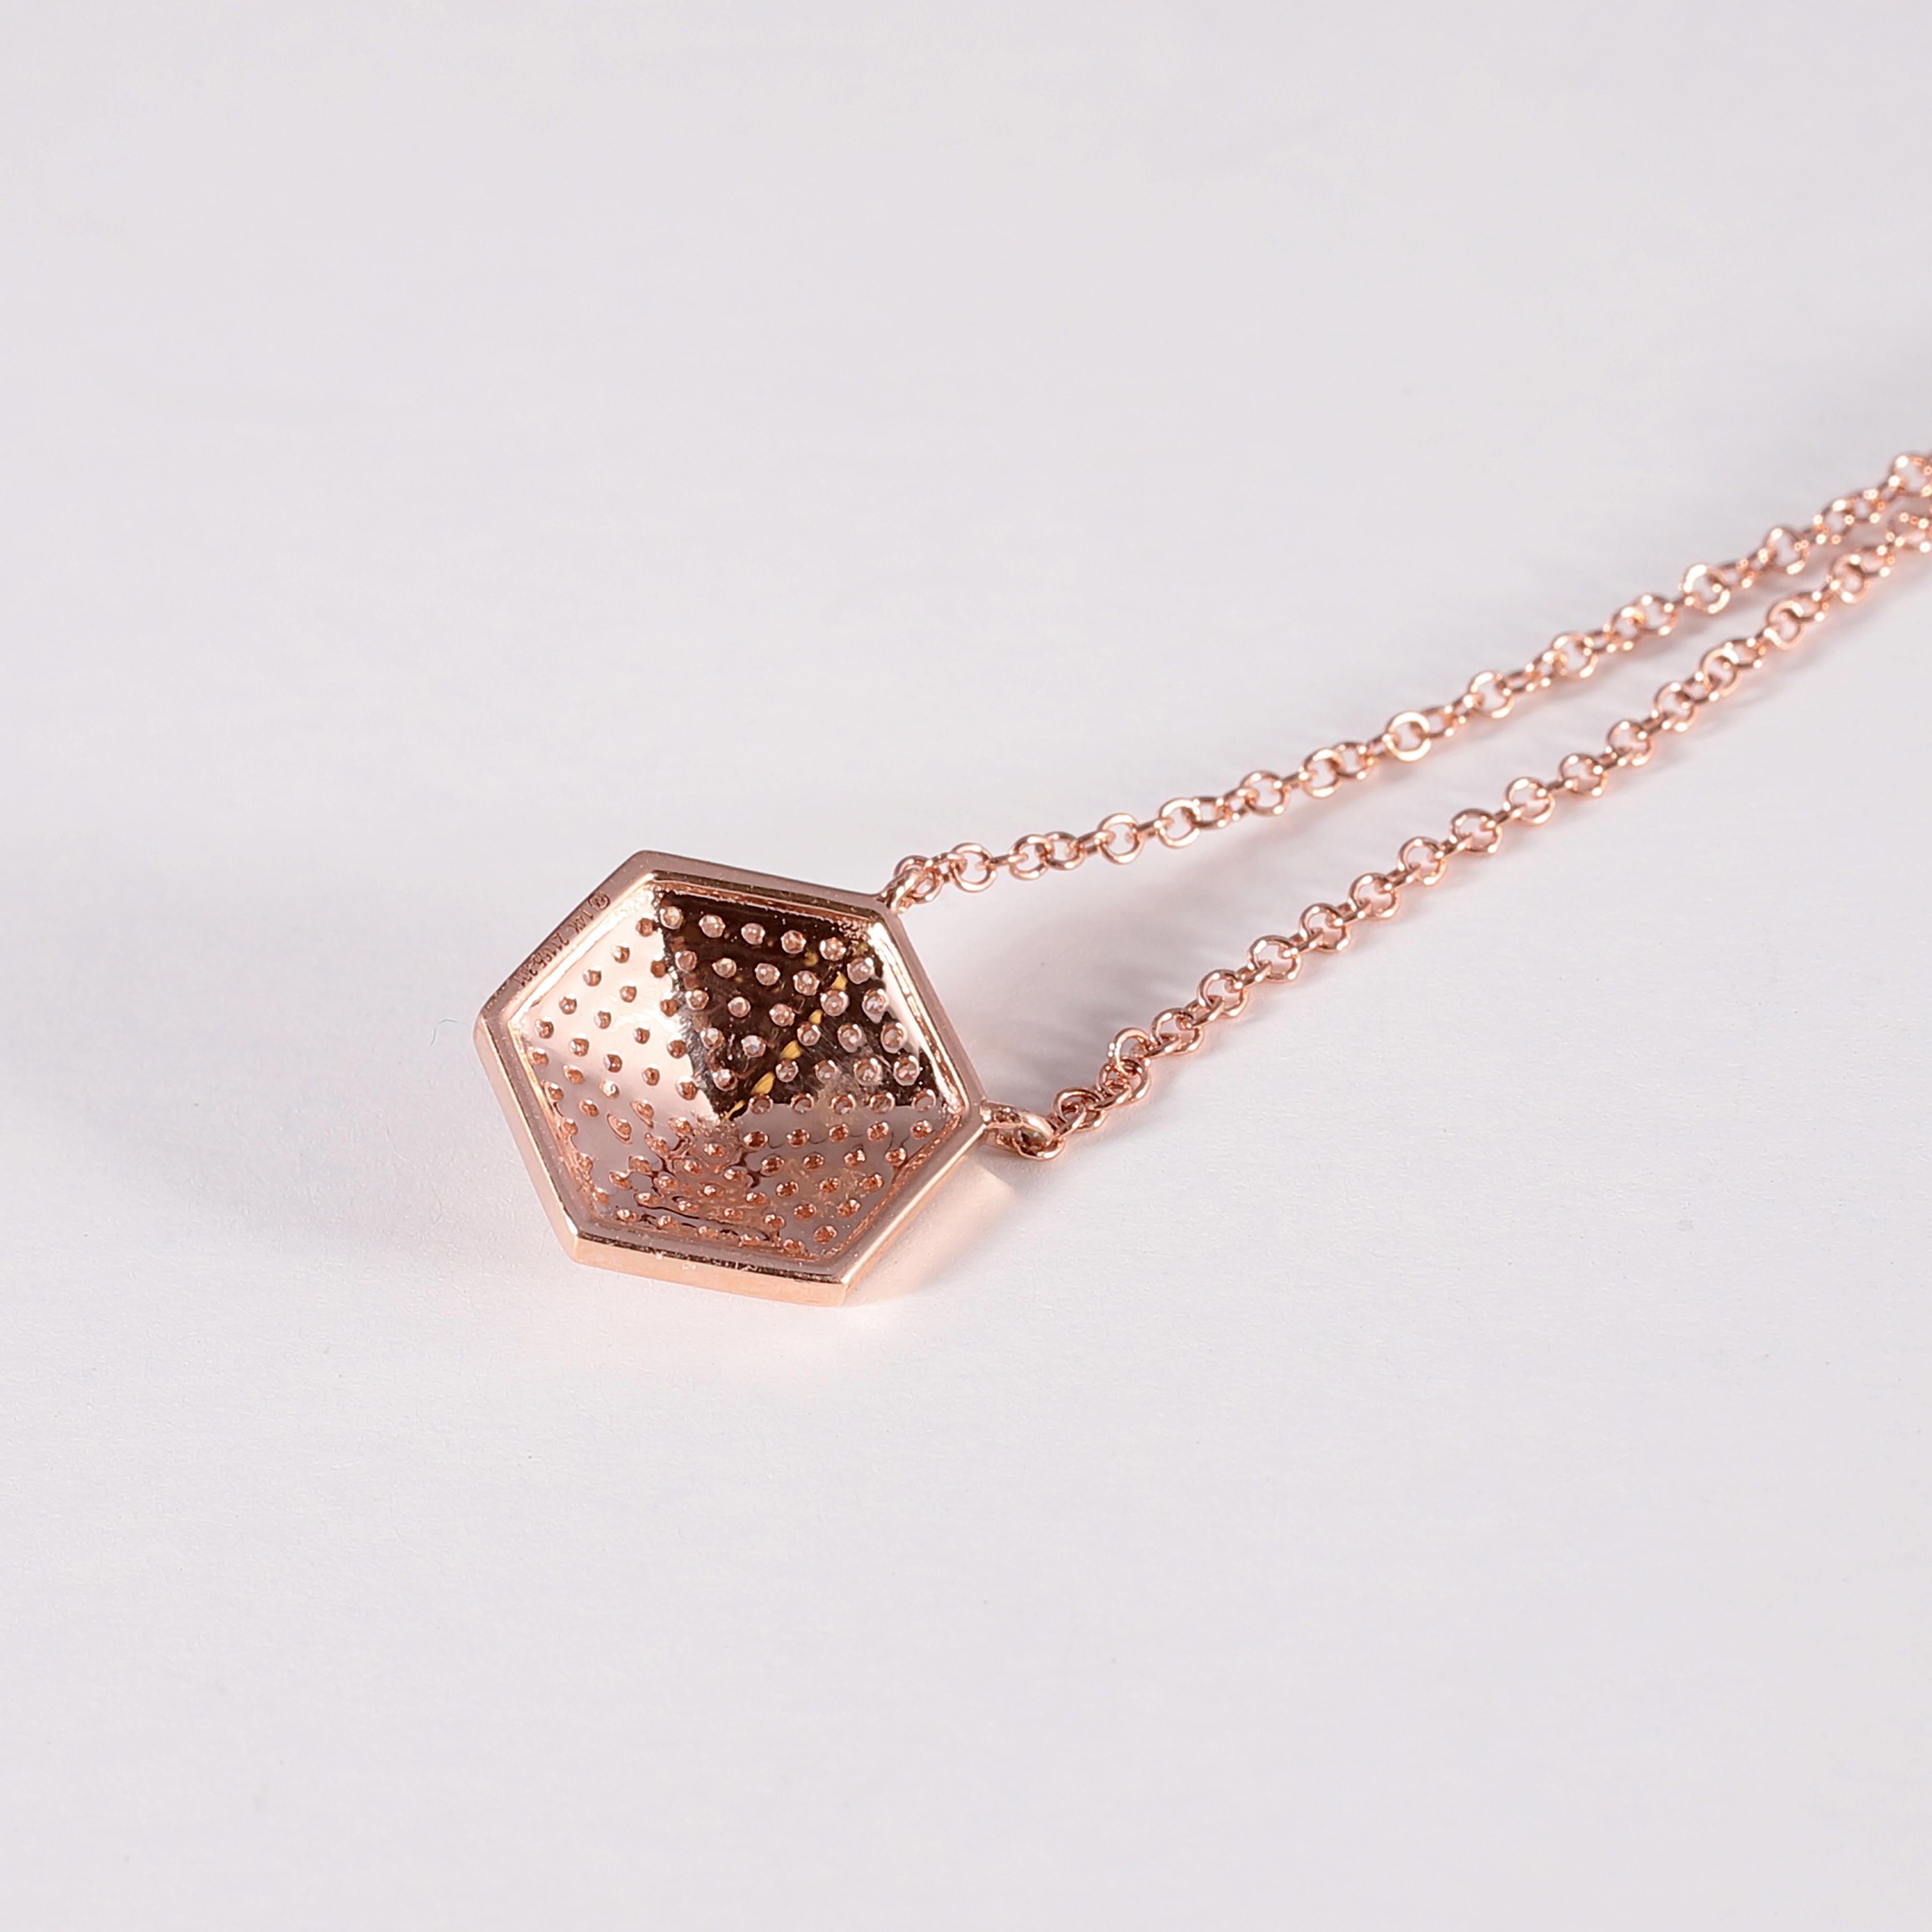 Such a classic!  Wear it alone or pair it with our rose gold, square diamond pendant necklace for a totally different look!
The 14 karat rose gold, interlocking link chain is centered with a rose gold, hexagon-shaped, 0.30 carat diamond pendant.